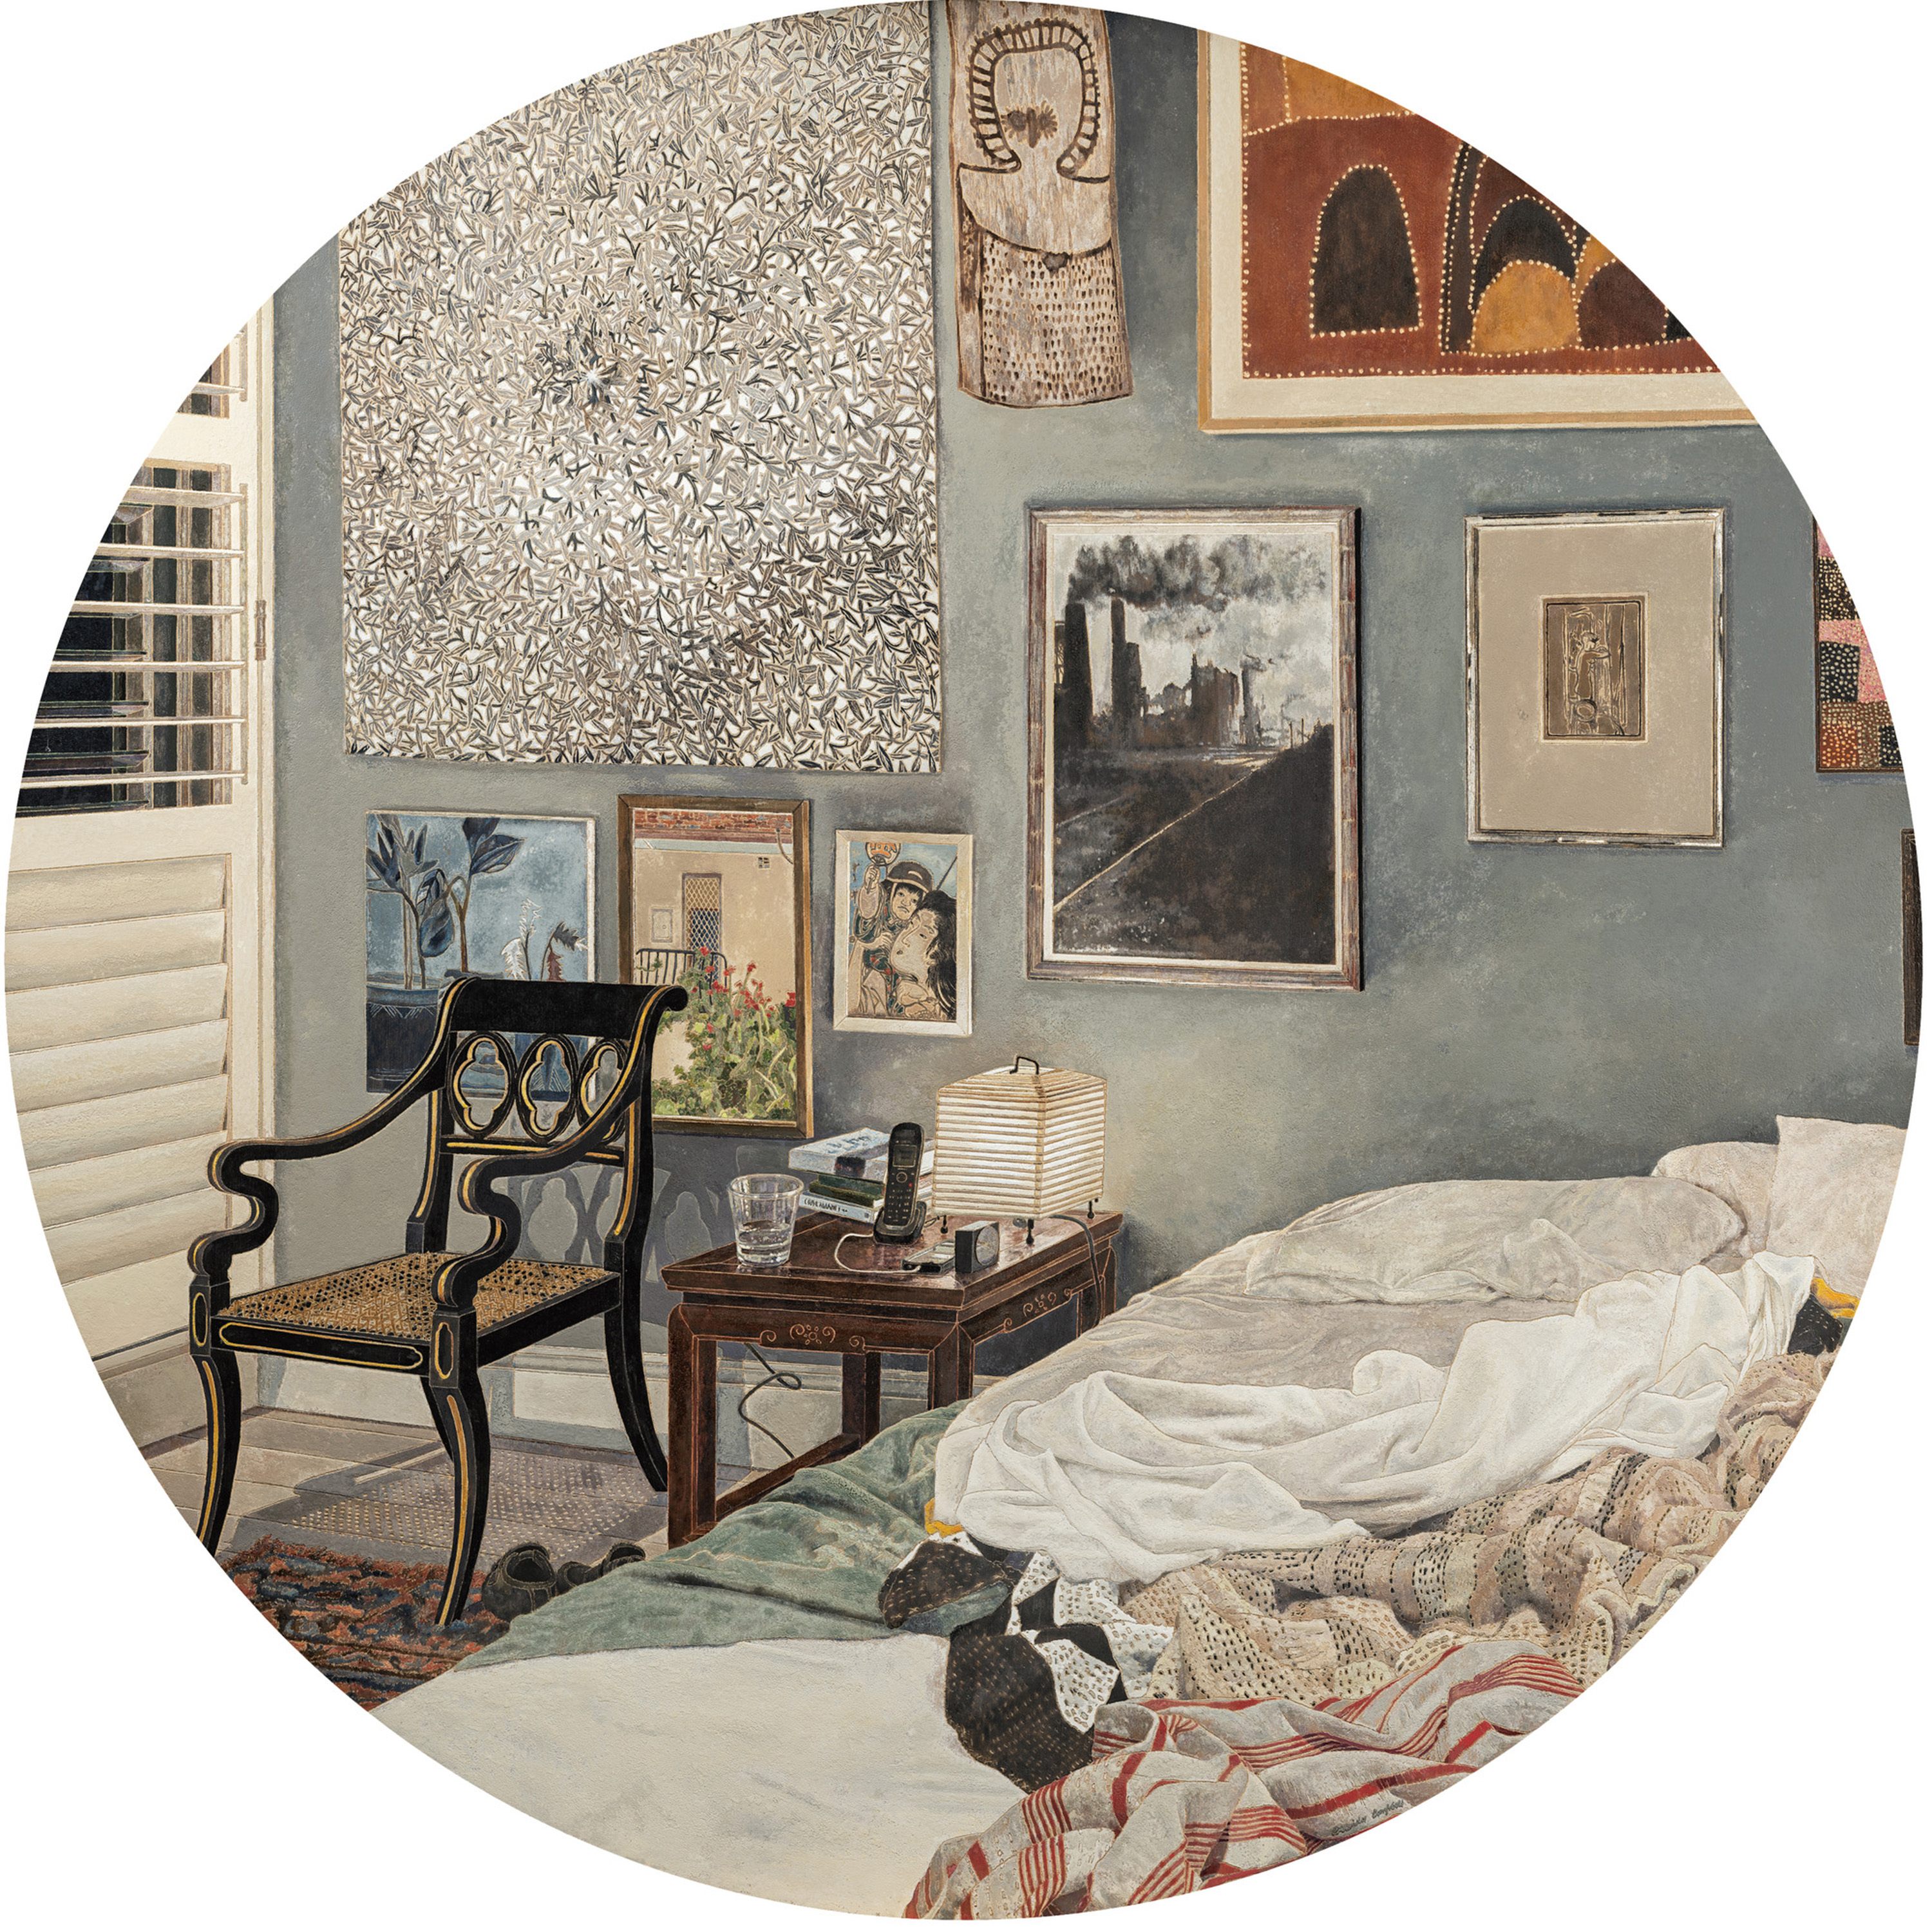 A circular painting of a bedroom, including a sleeper bed, a nightstand, a chair, and an art-covered wall